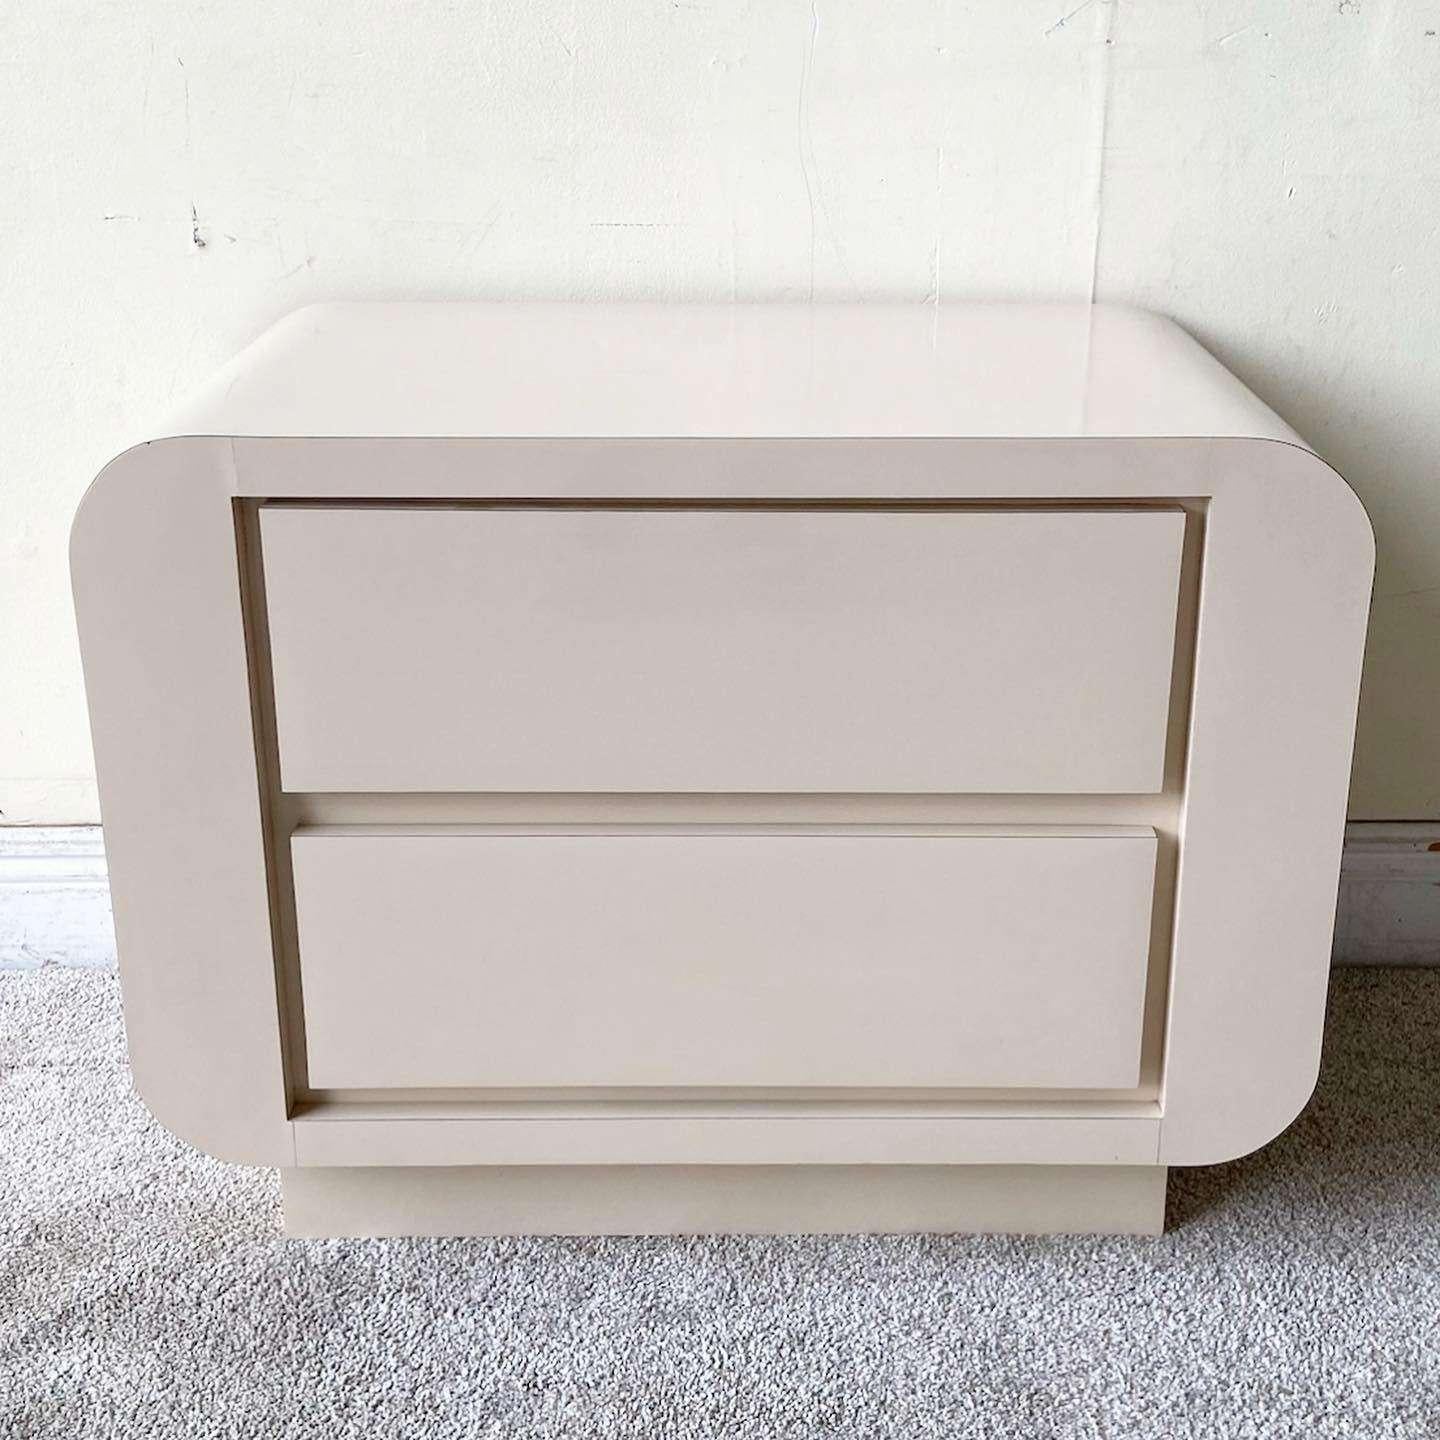 Postmodern Tan Lacquer Laminate Waterfall Nightstand In Good Condition For Sale In Delray Beach, FL